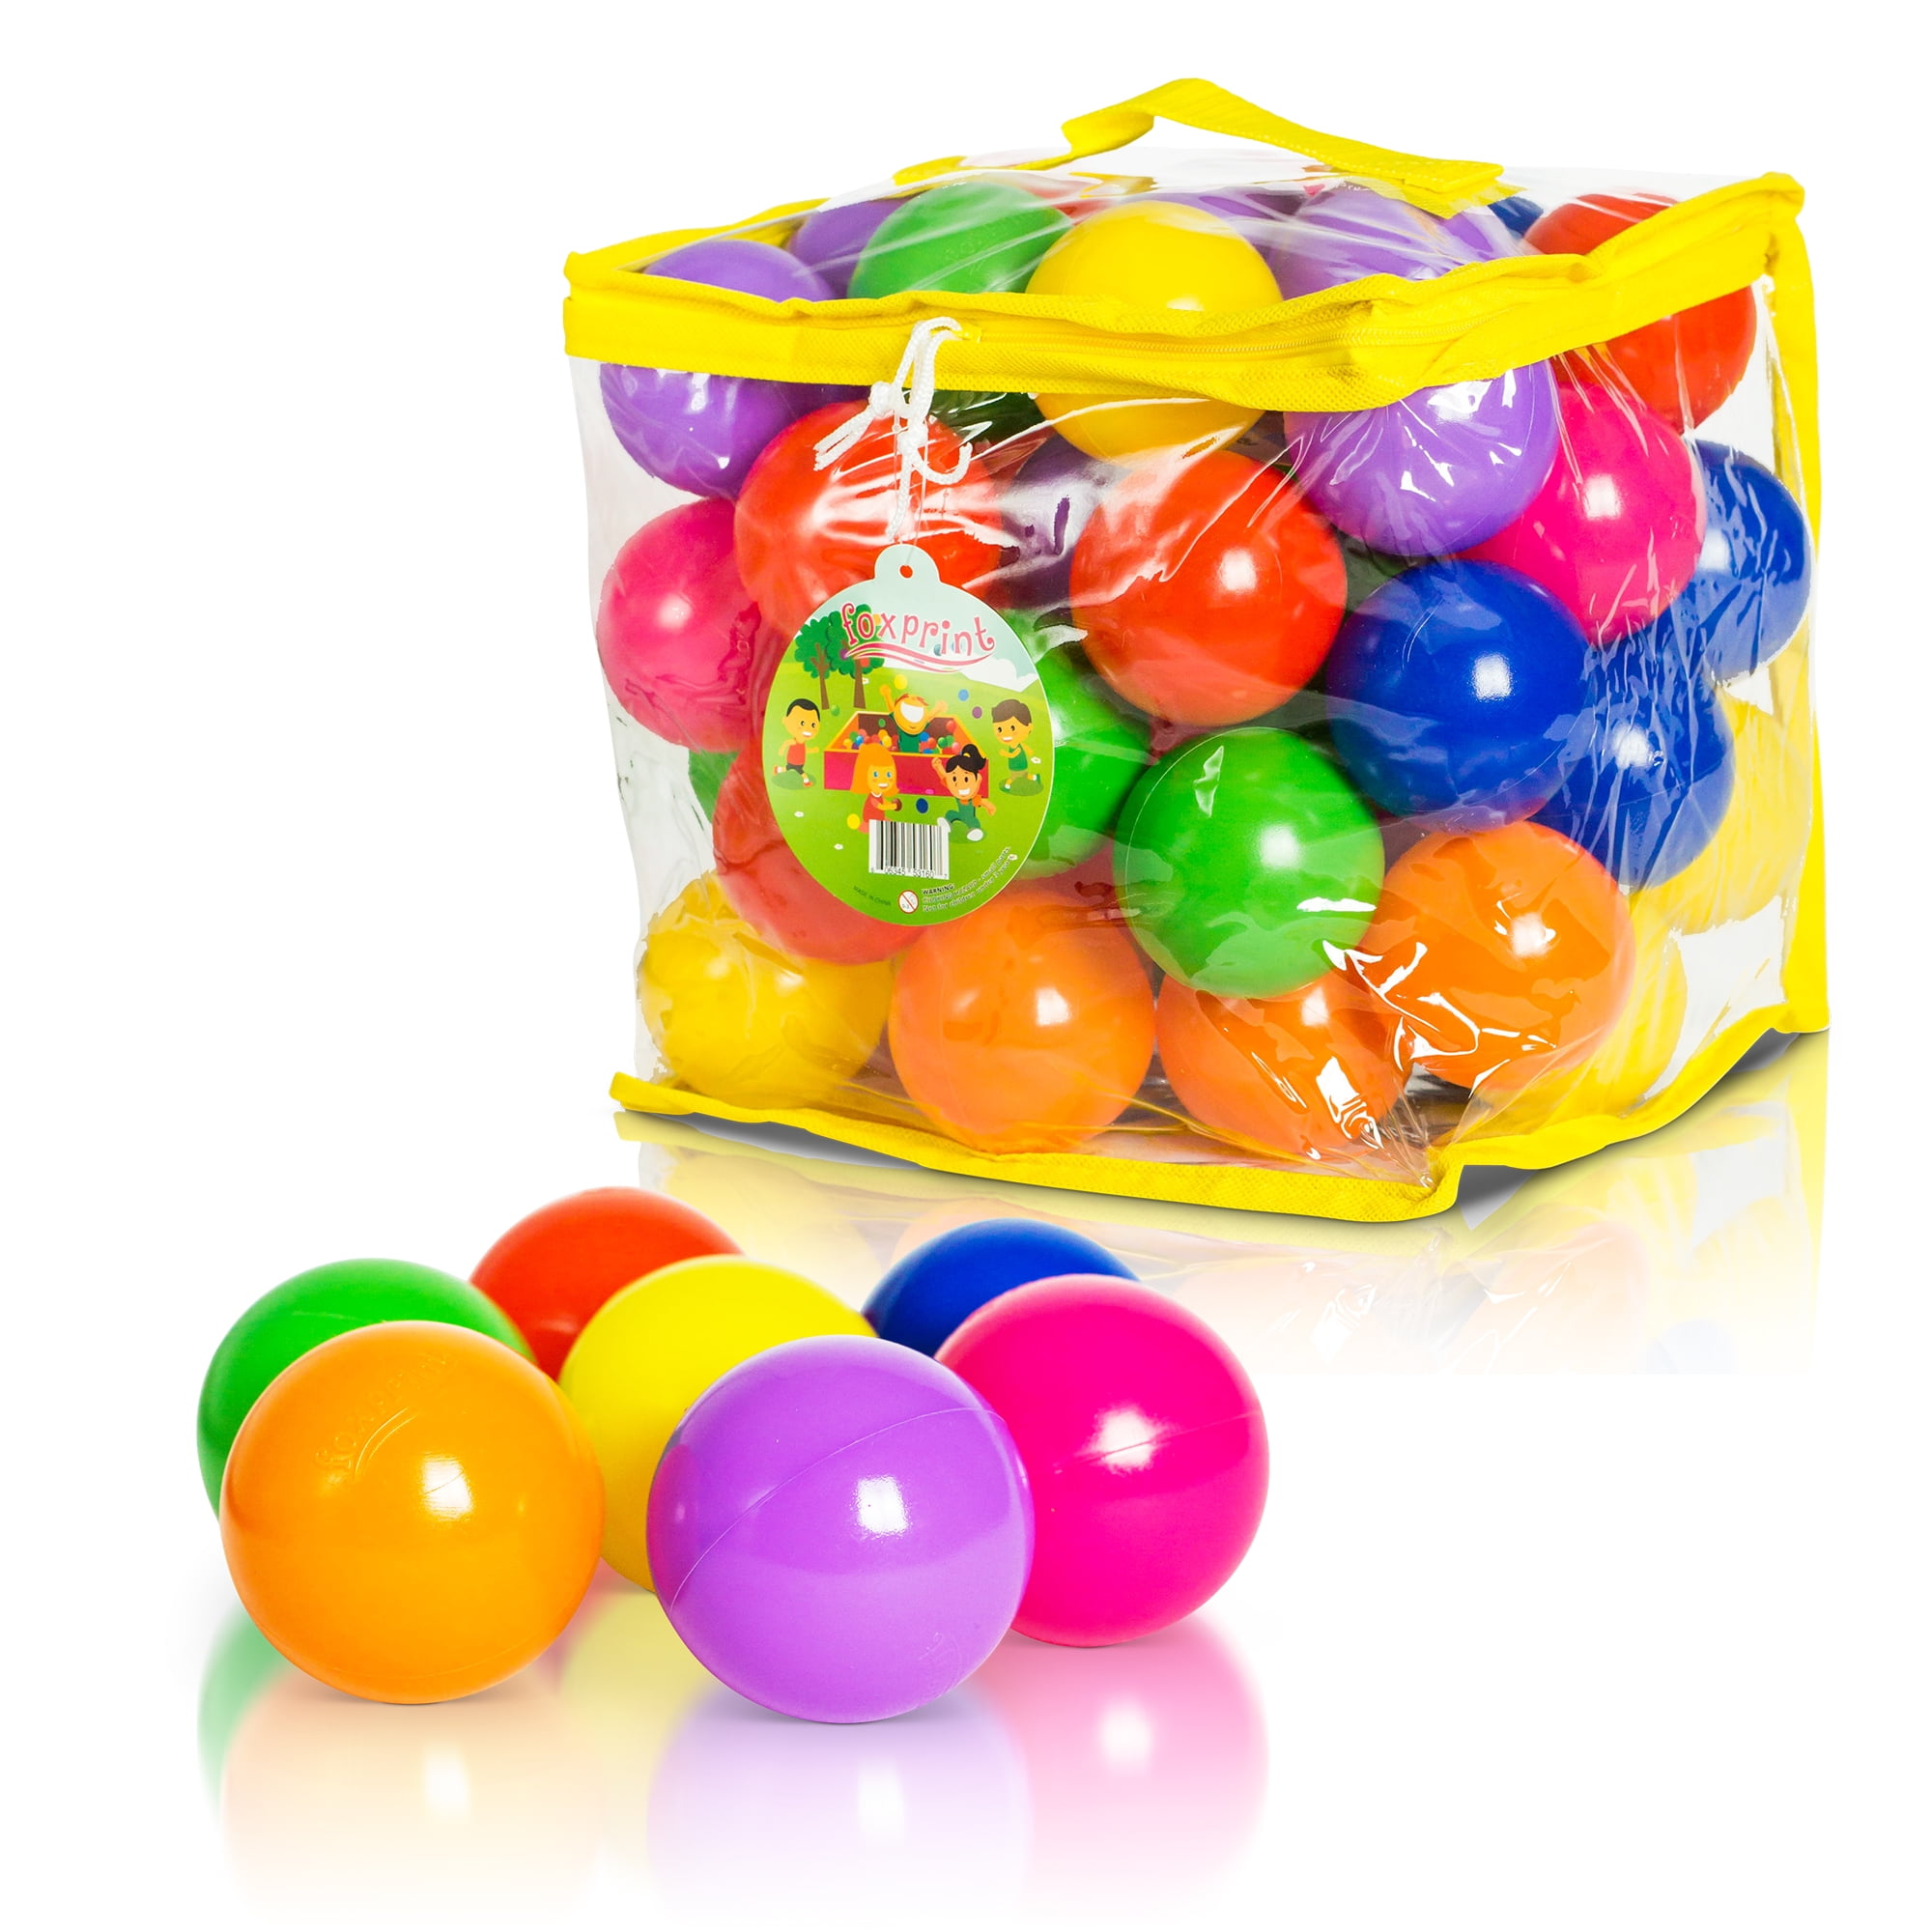 CHILDRENS PLASTIC PLAY BALLS FOR BALL PITS PEN POOL MULTICOLOURED TOY SOFT 